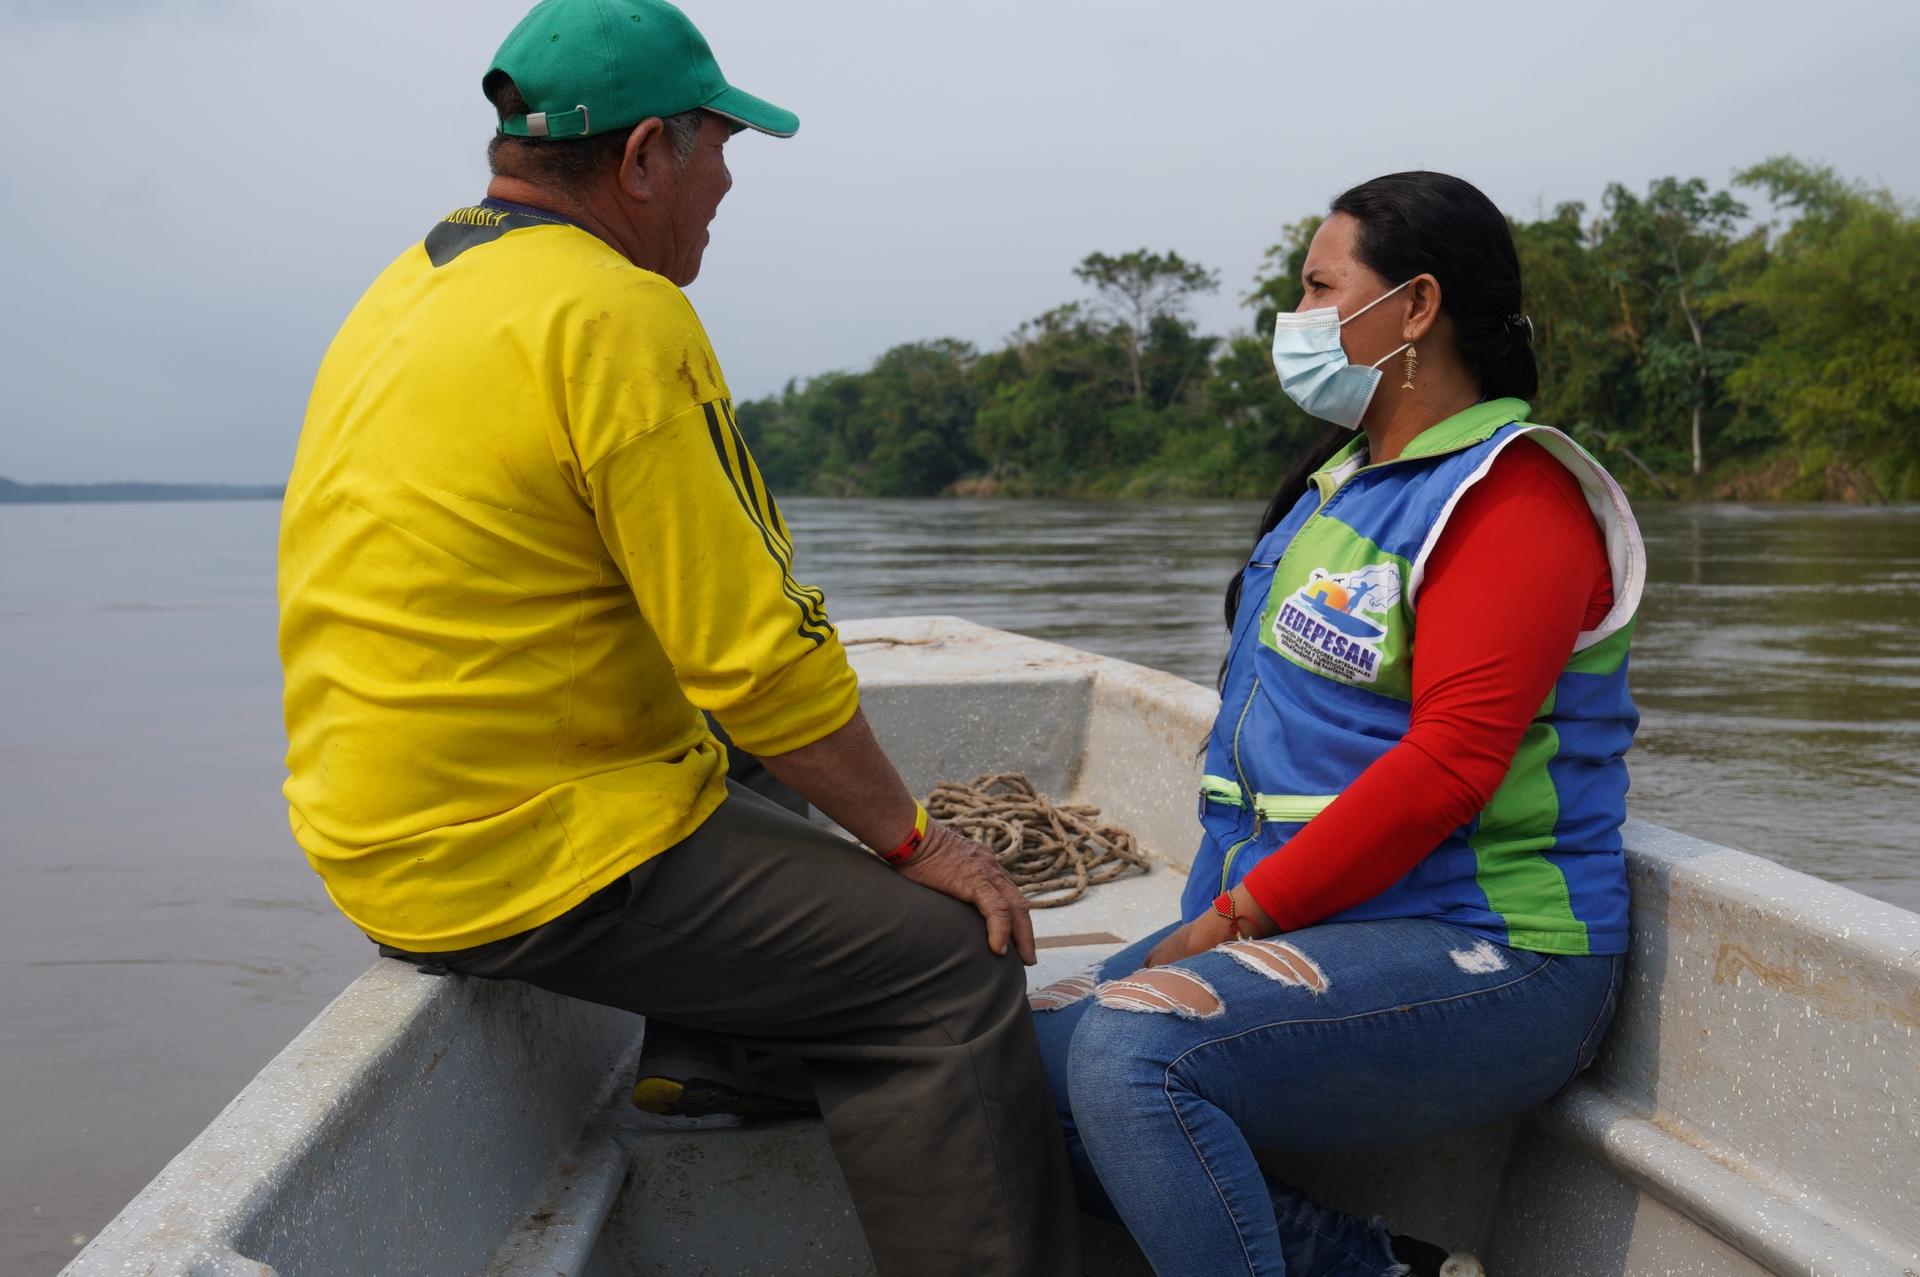 A man wearing a yellow shirt and green cap and a woman wearing a blue vest with a mask ride a boat on a river. 